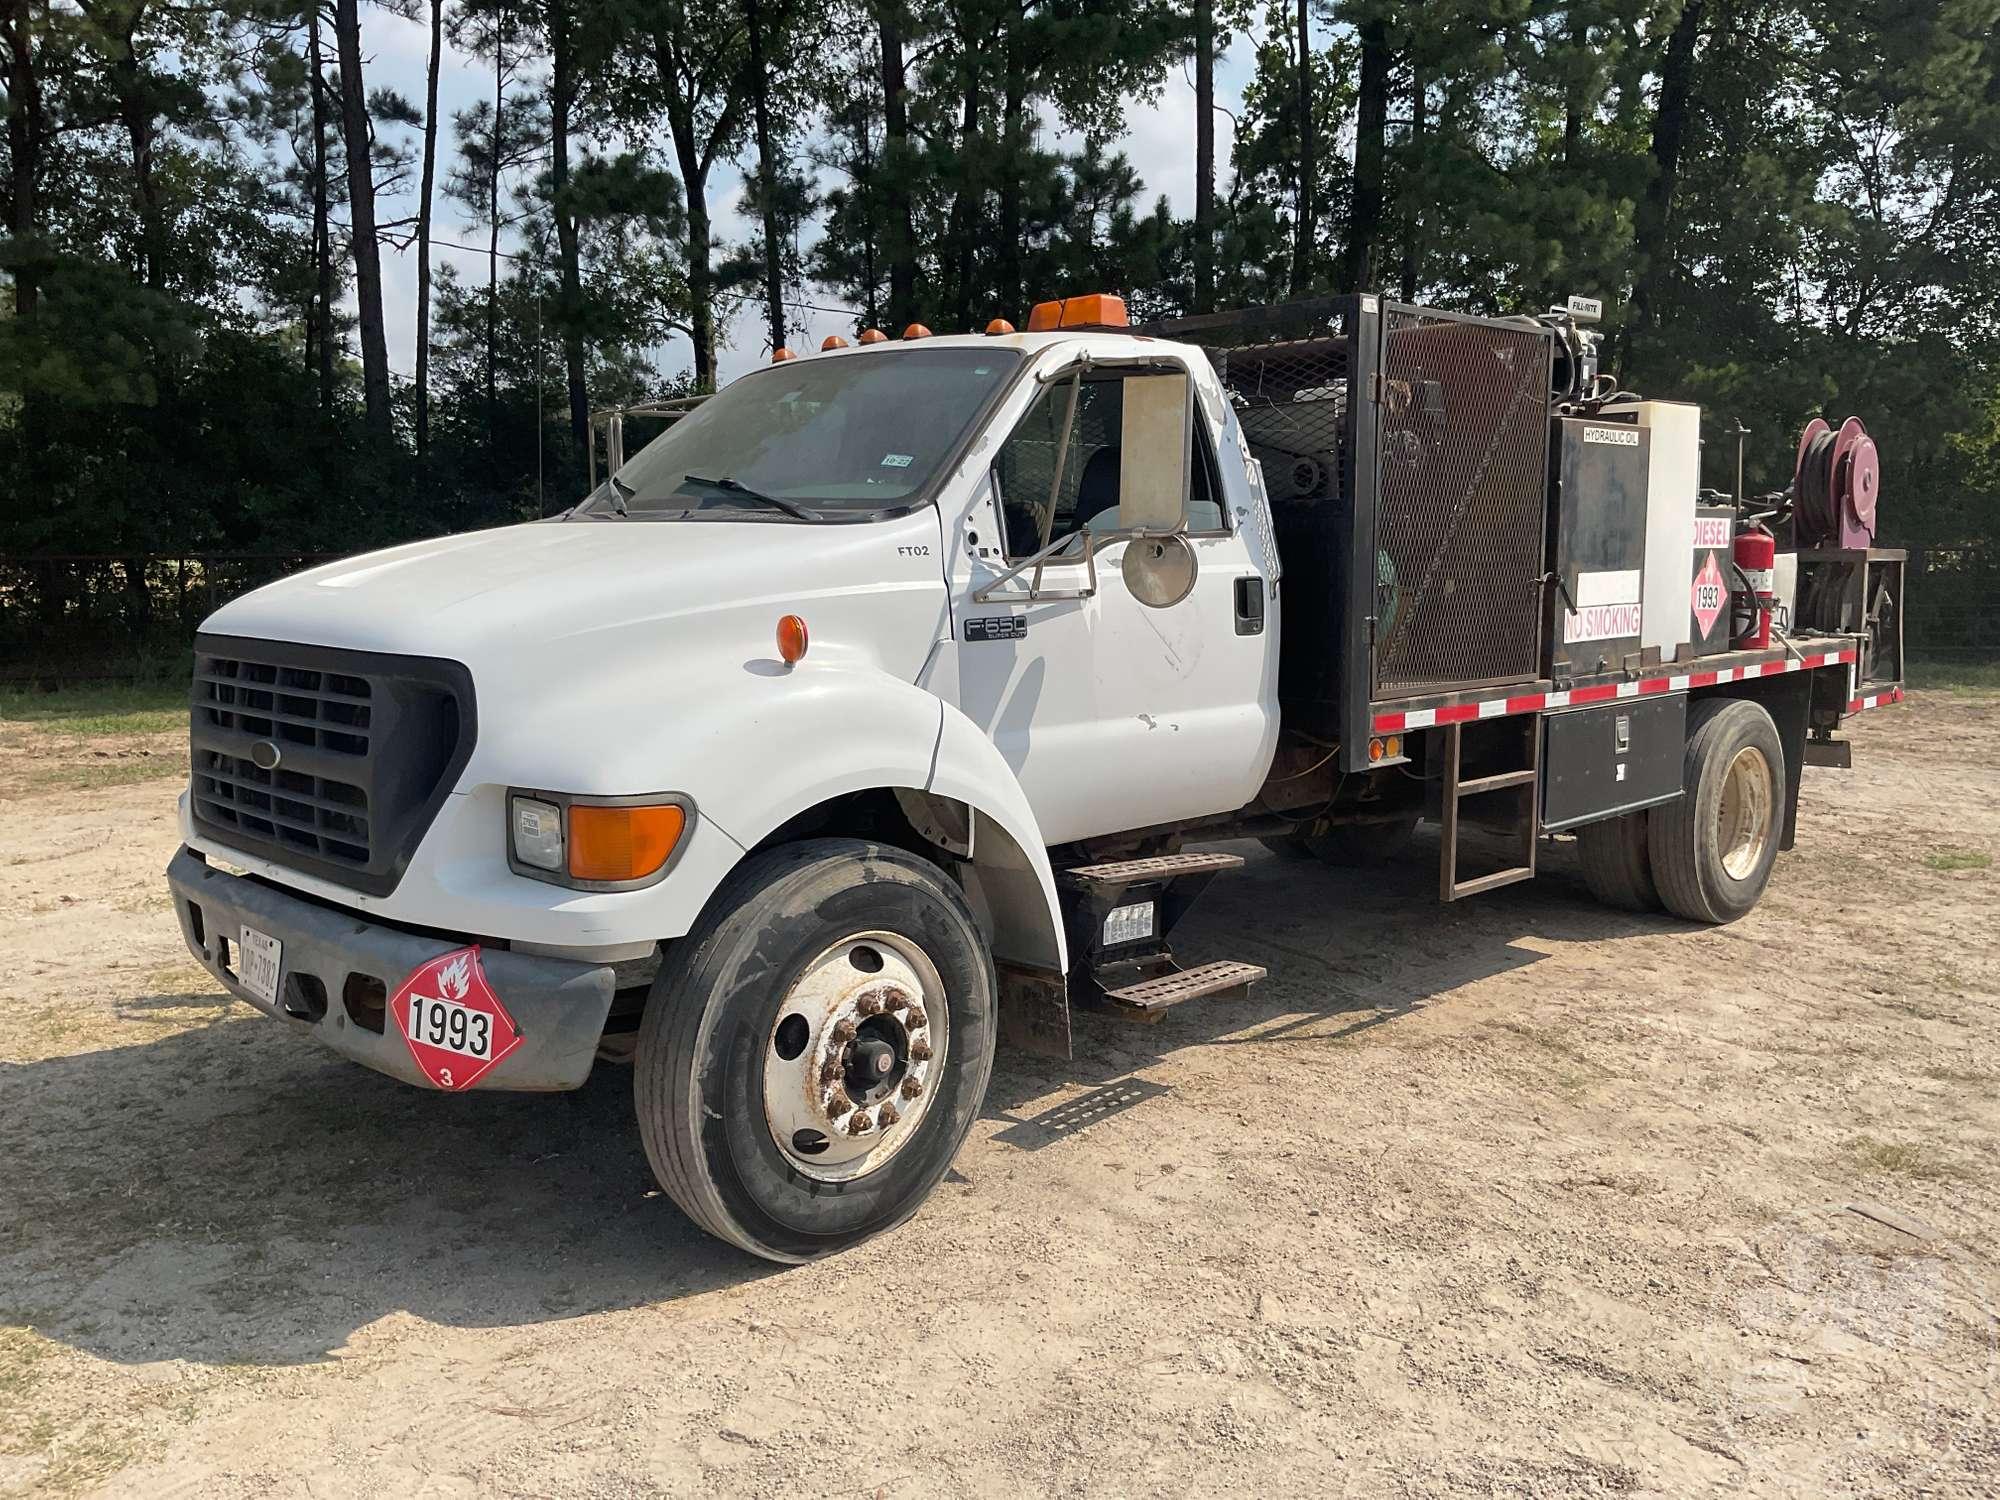 2003 FORD F650SD  VIN: 3FDNF65Y93MB02884 FUEL & LUBE TRUCK